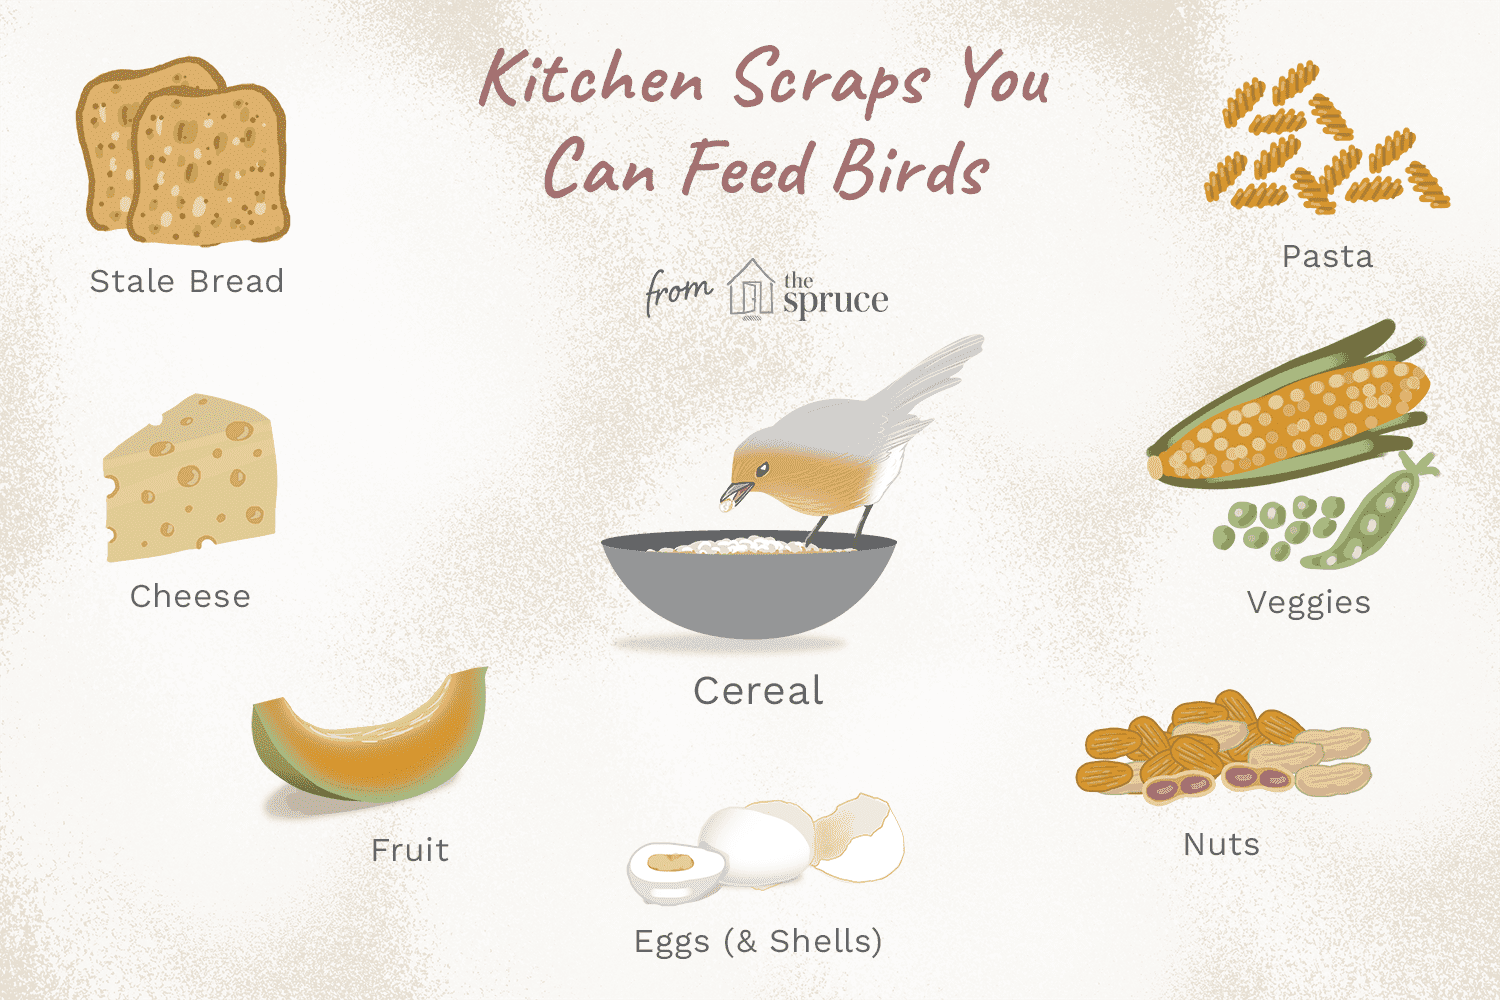 10 Kitchen Scraps You Can Feed Birds